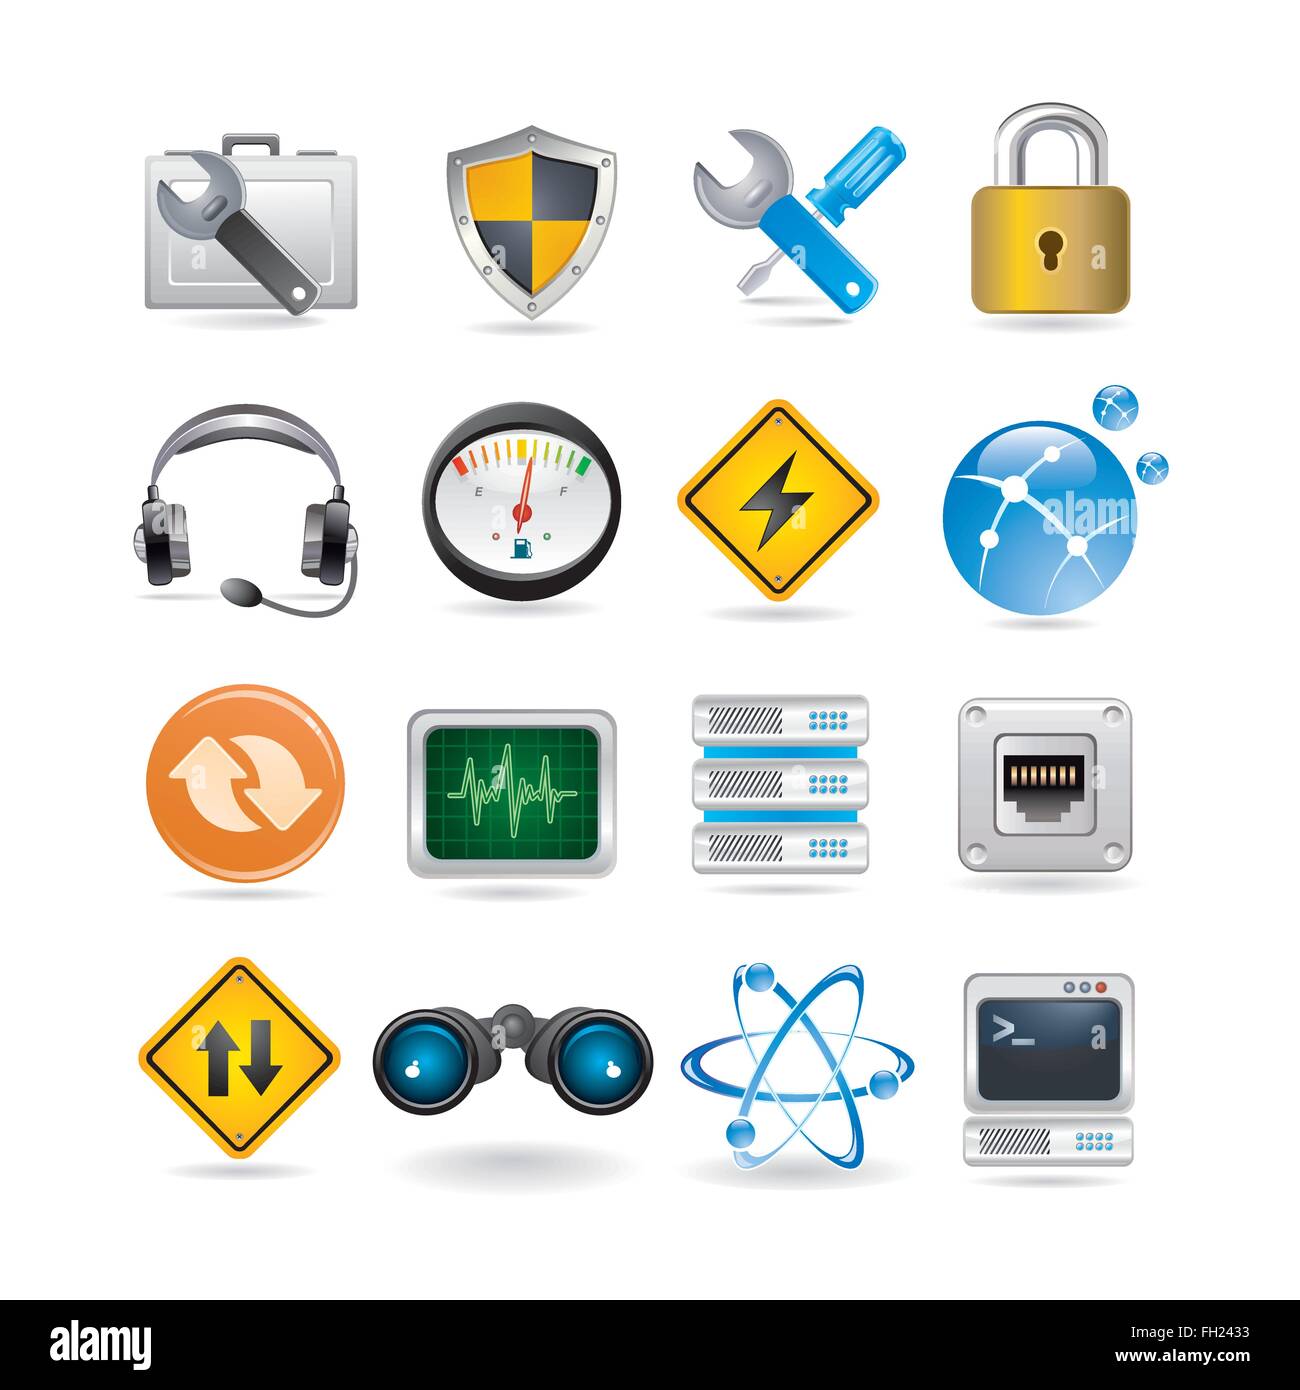 Network icons set Stock Vector